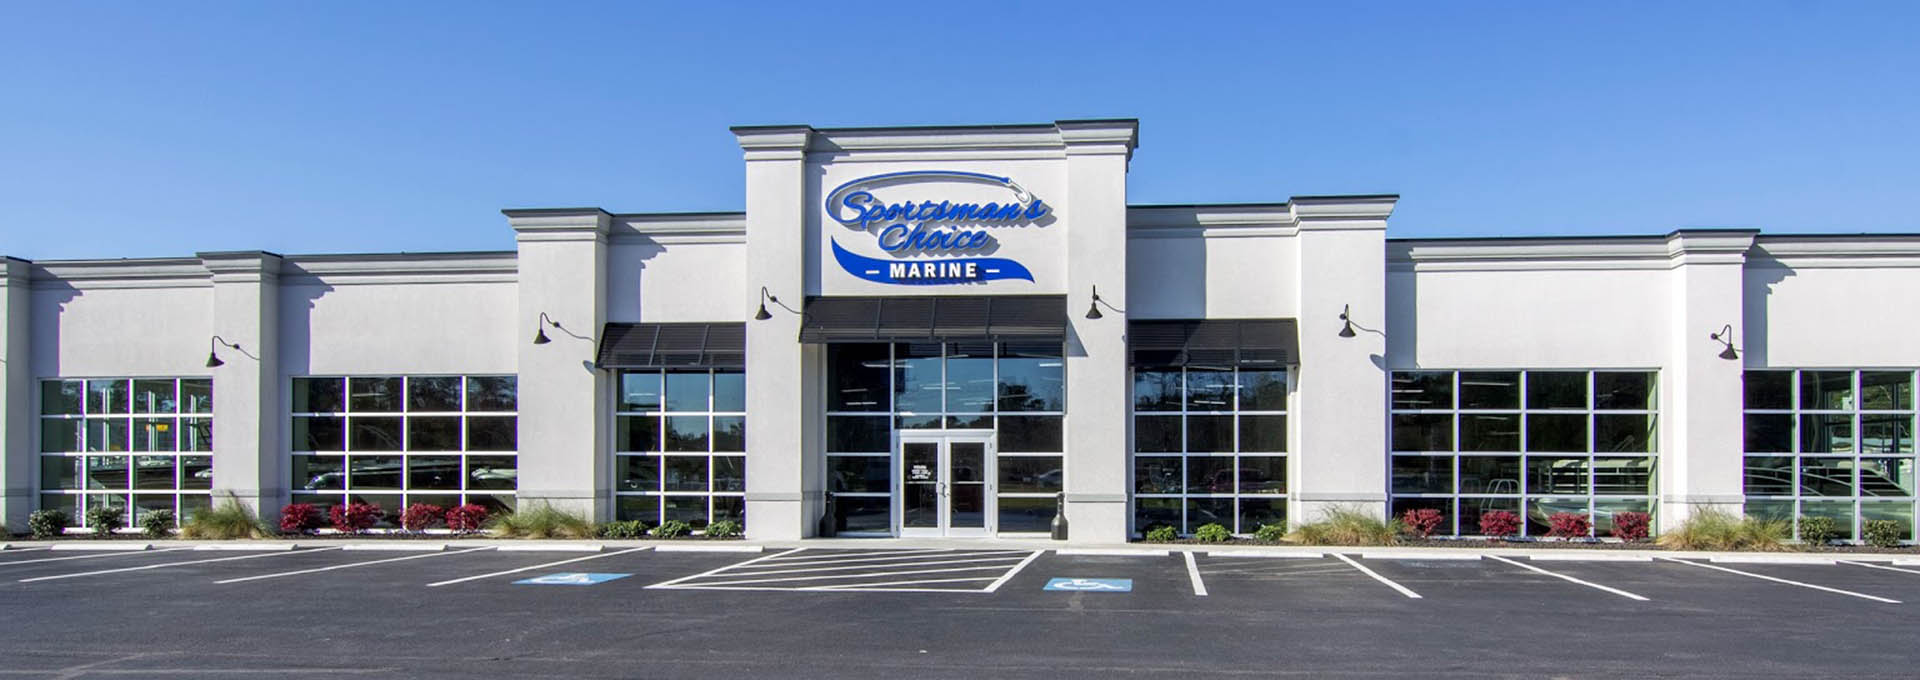 Store front image for the dealership located at Longs, SC